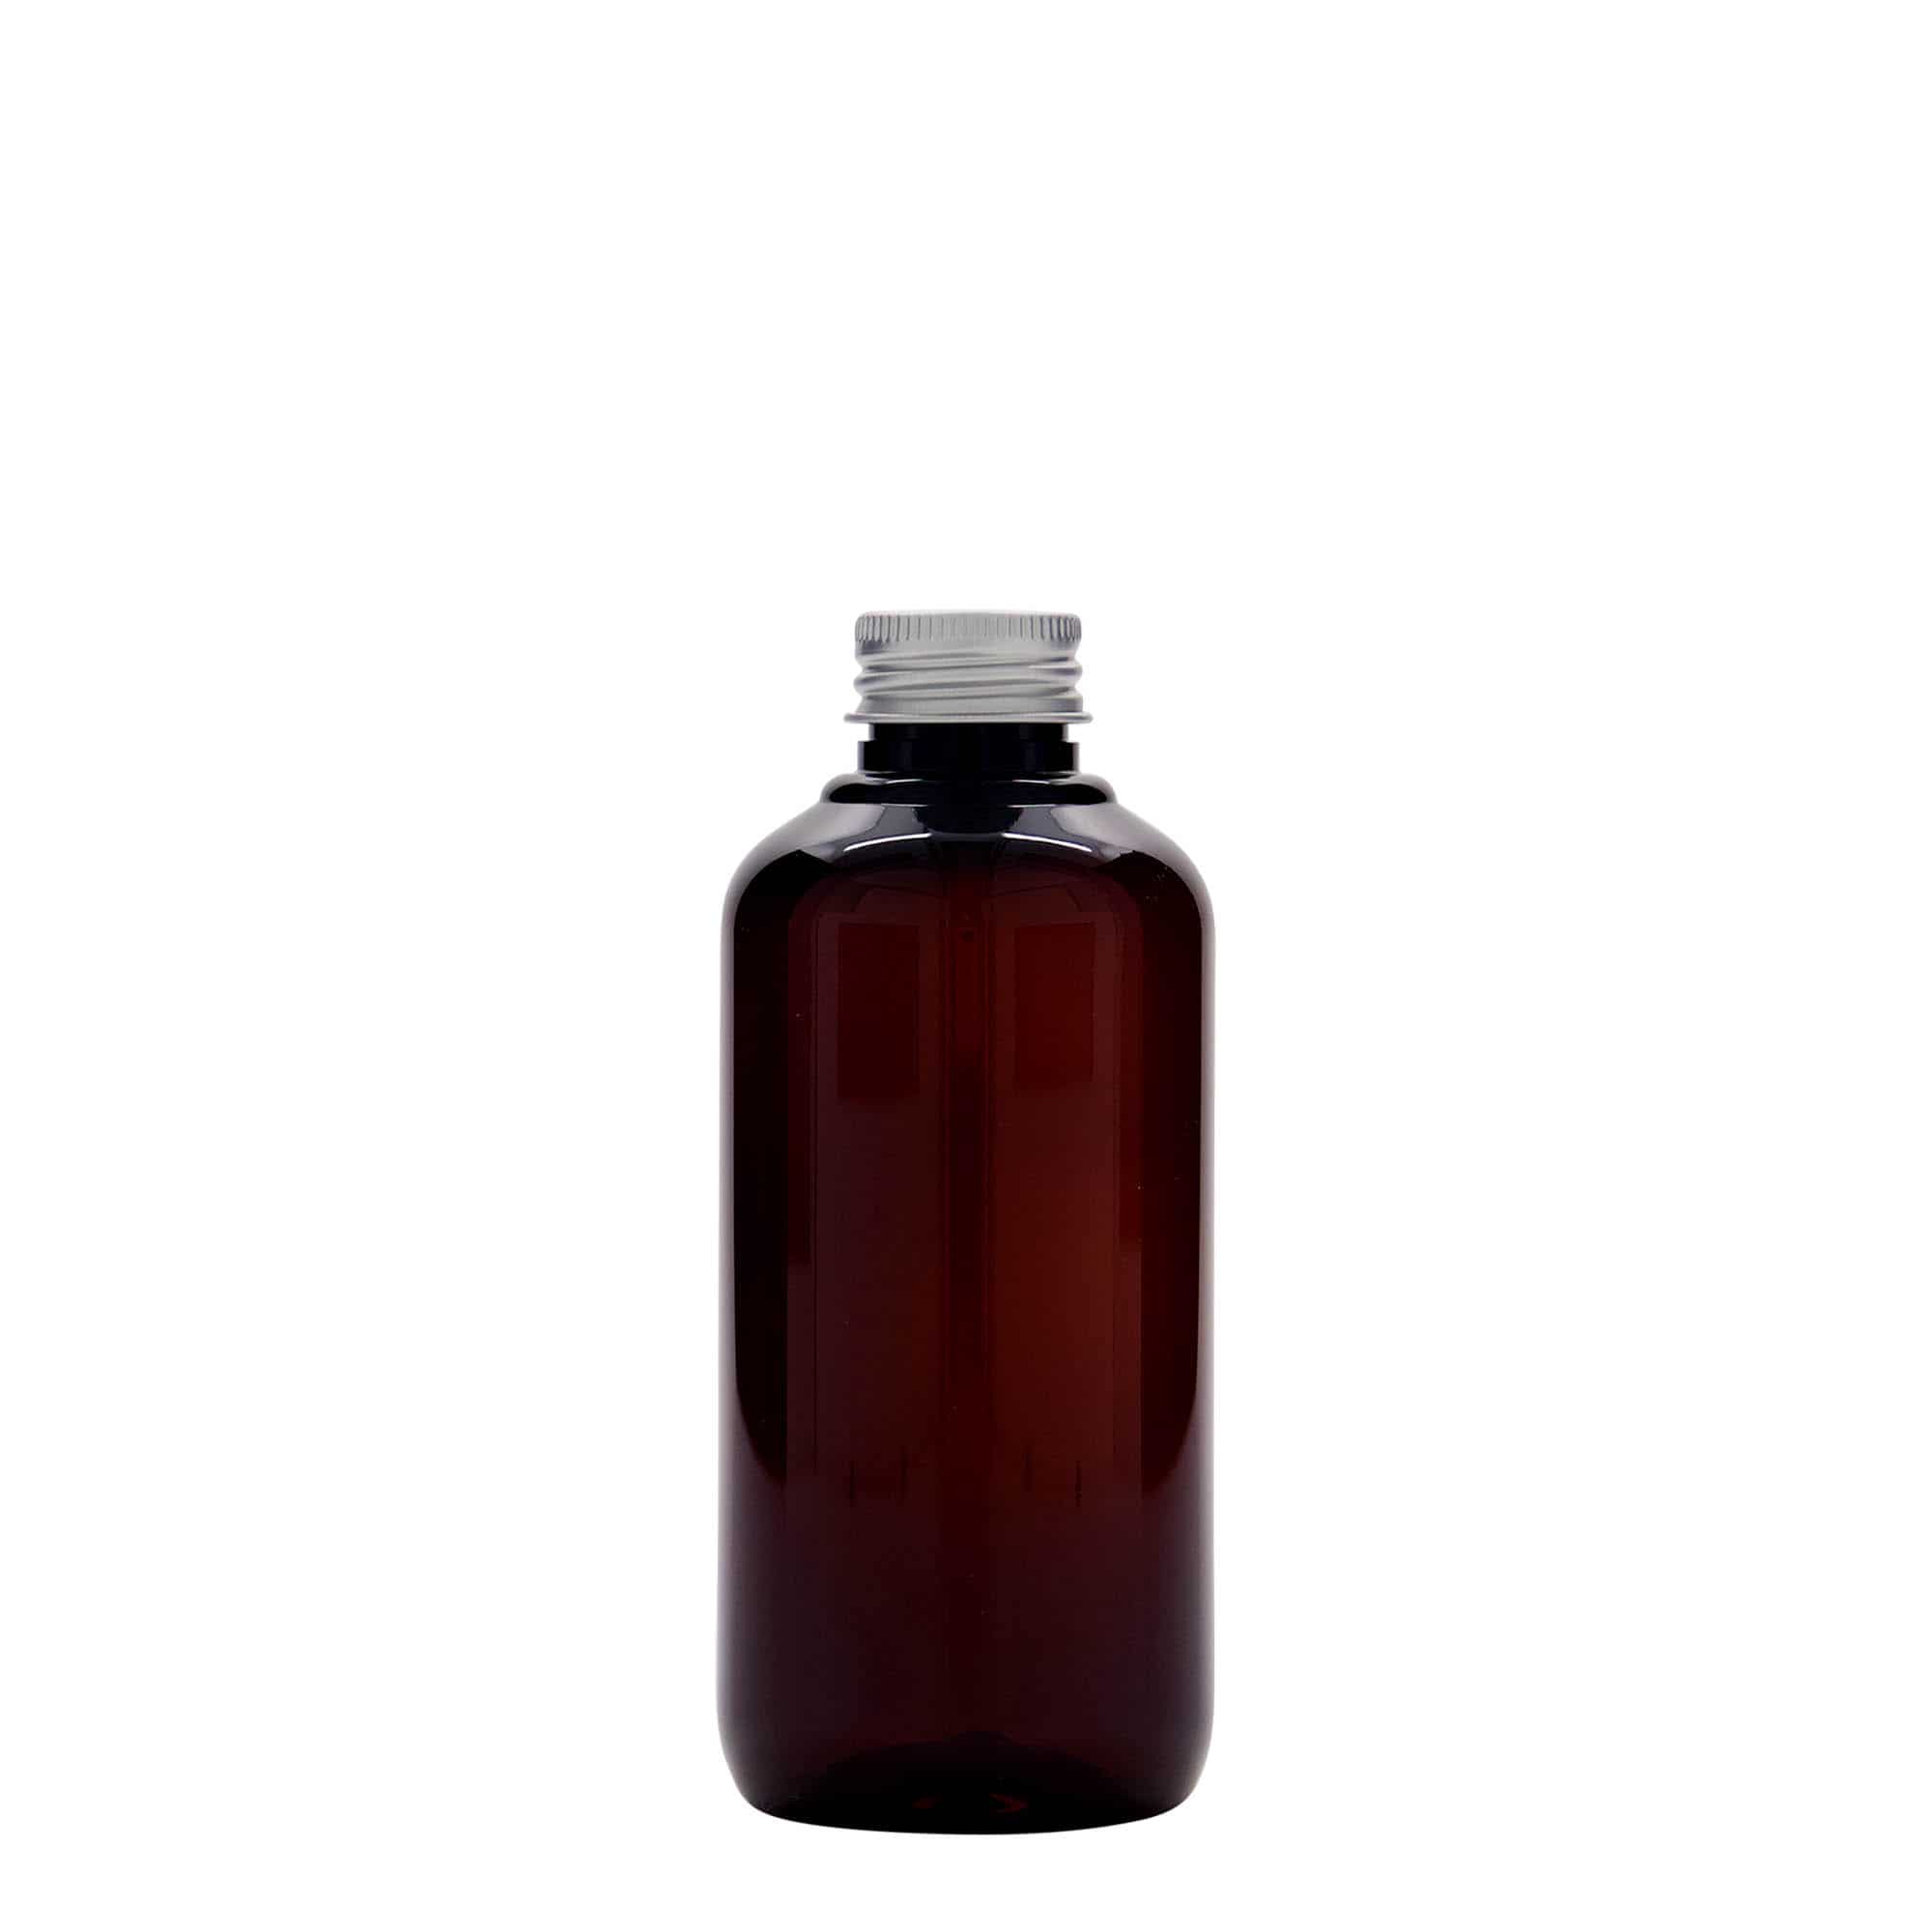 200 ml recycled plastic bottle 'Victor's Best', PCR, brown, closure: GPI 24/410